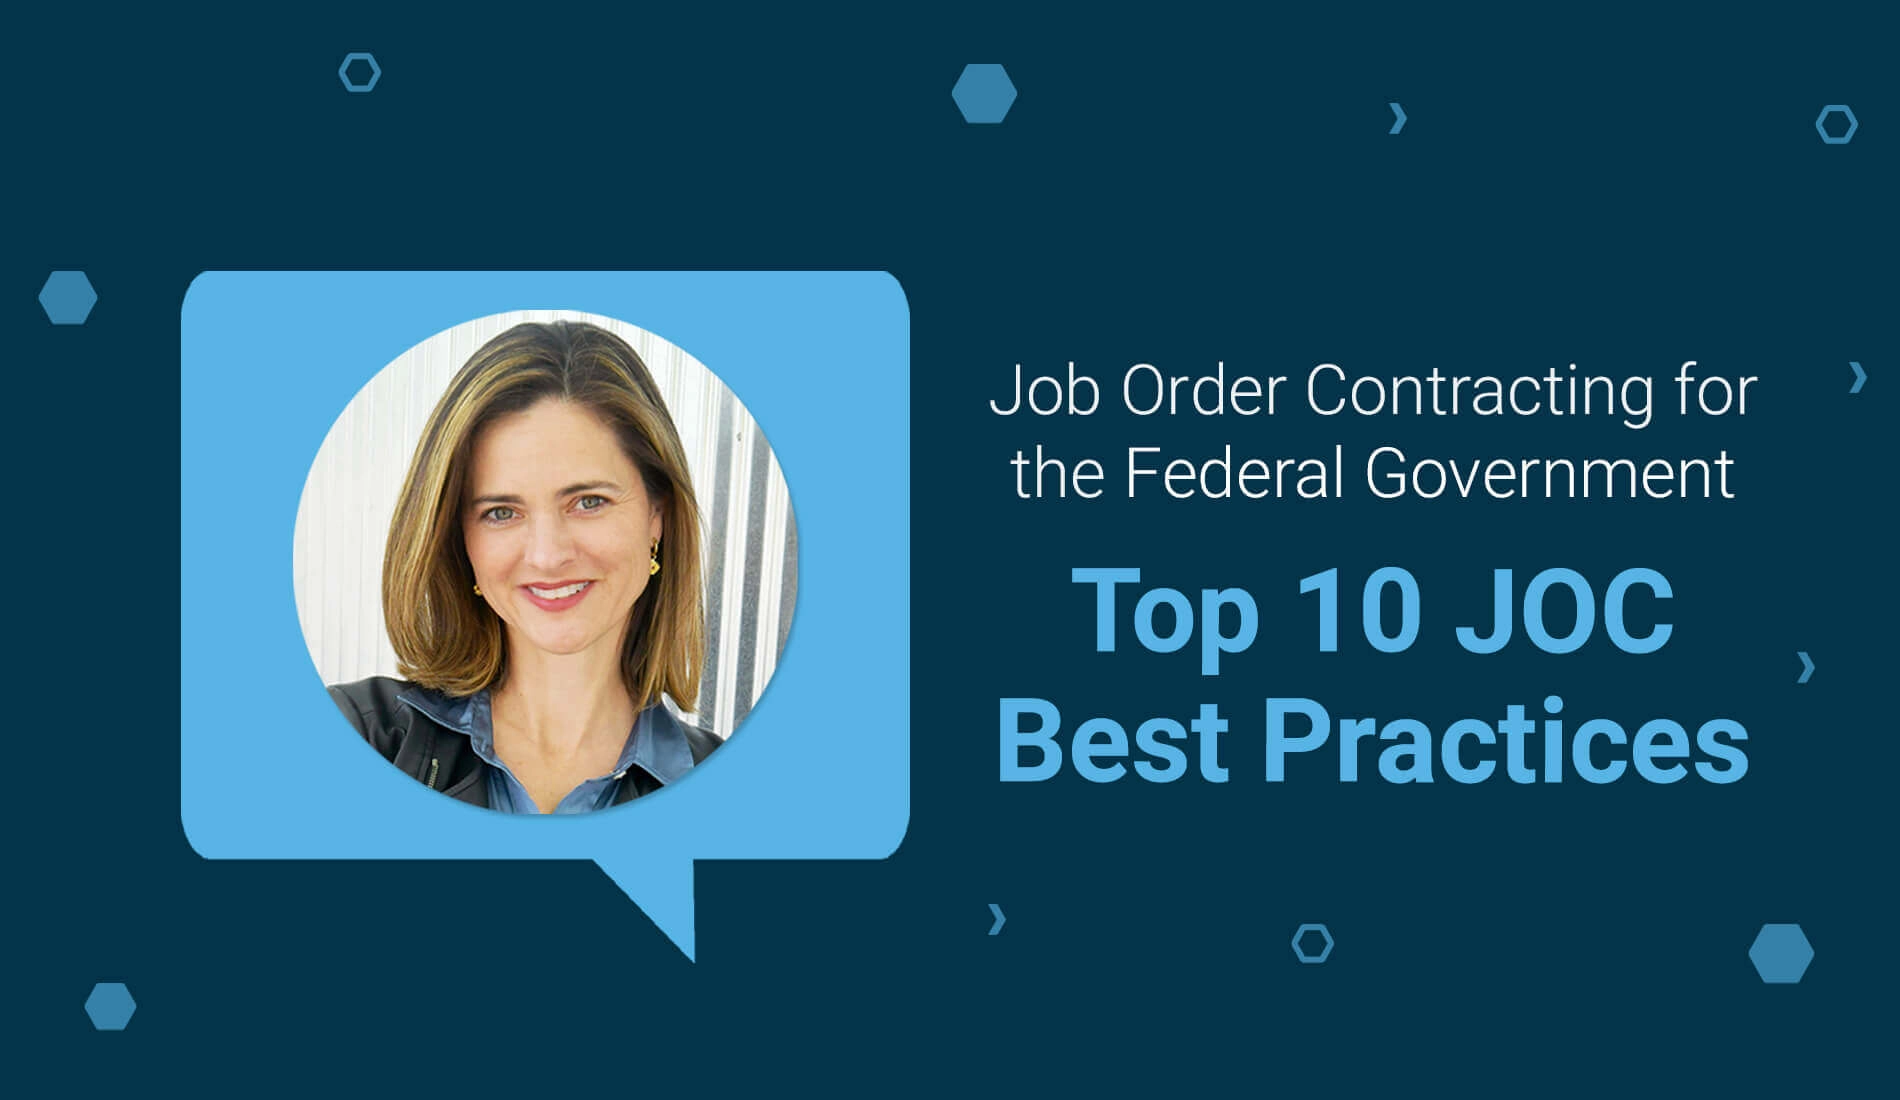 Top 10 JOC Best Practices for the Federal Space 4